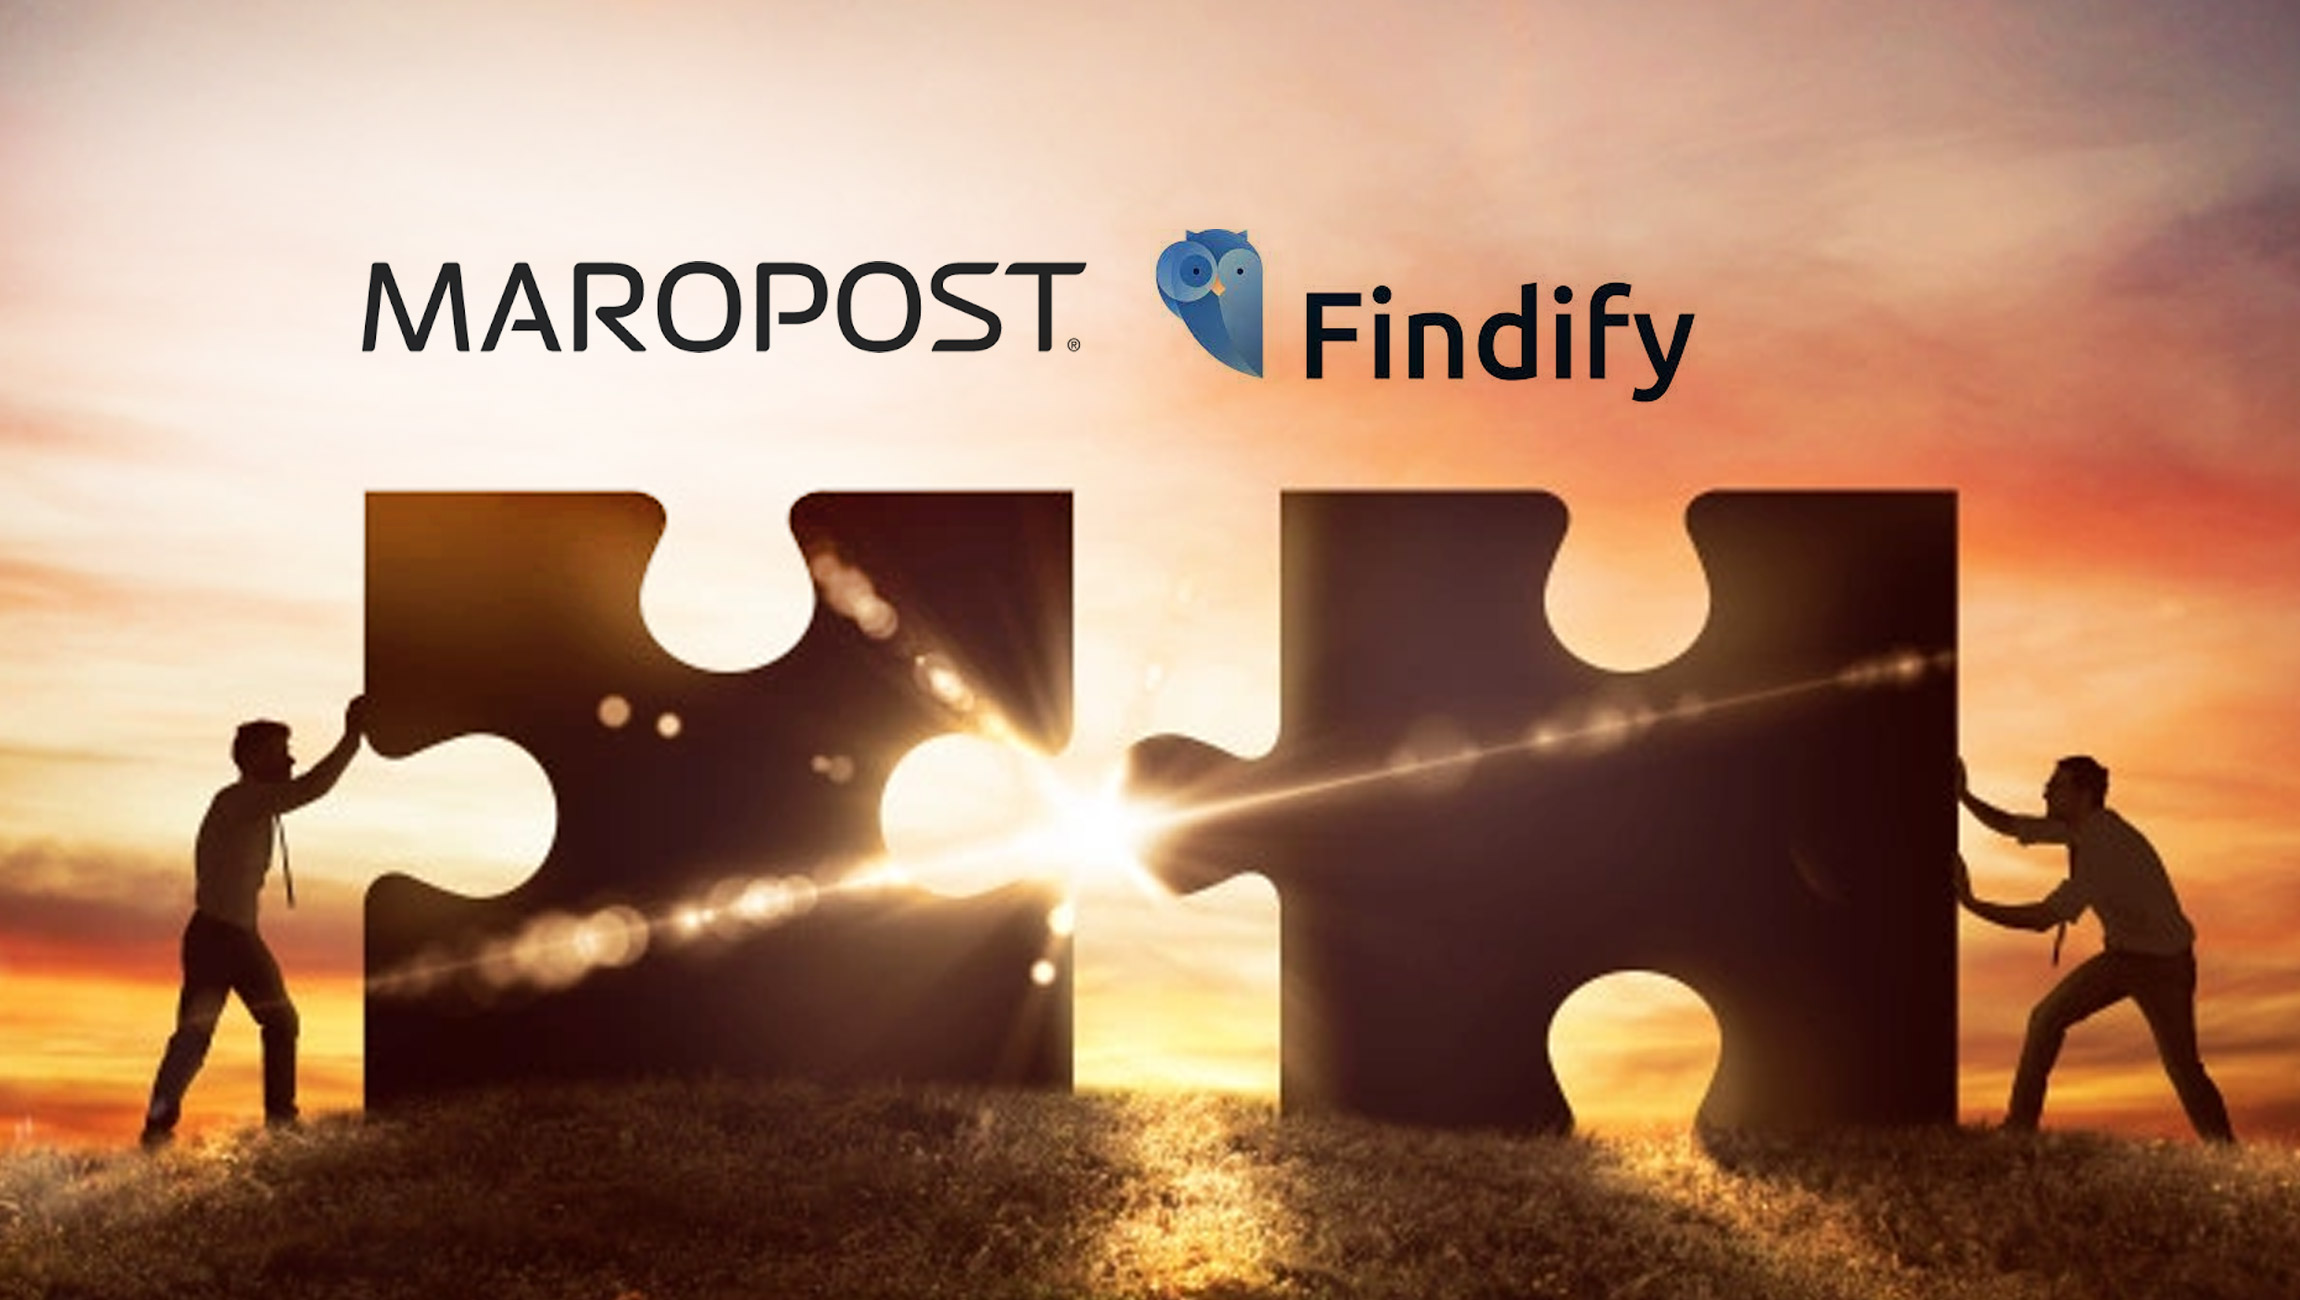 Maropost Acquires Findify to Power Next-Generation Ecommerce Shopping Experiences